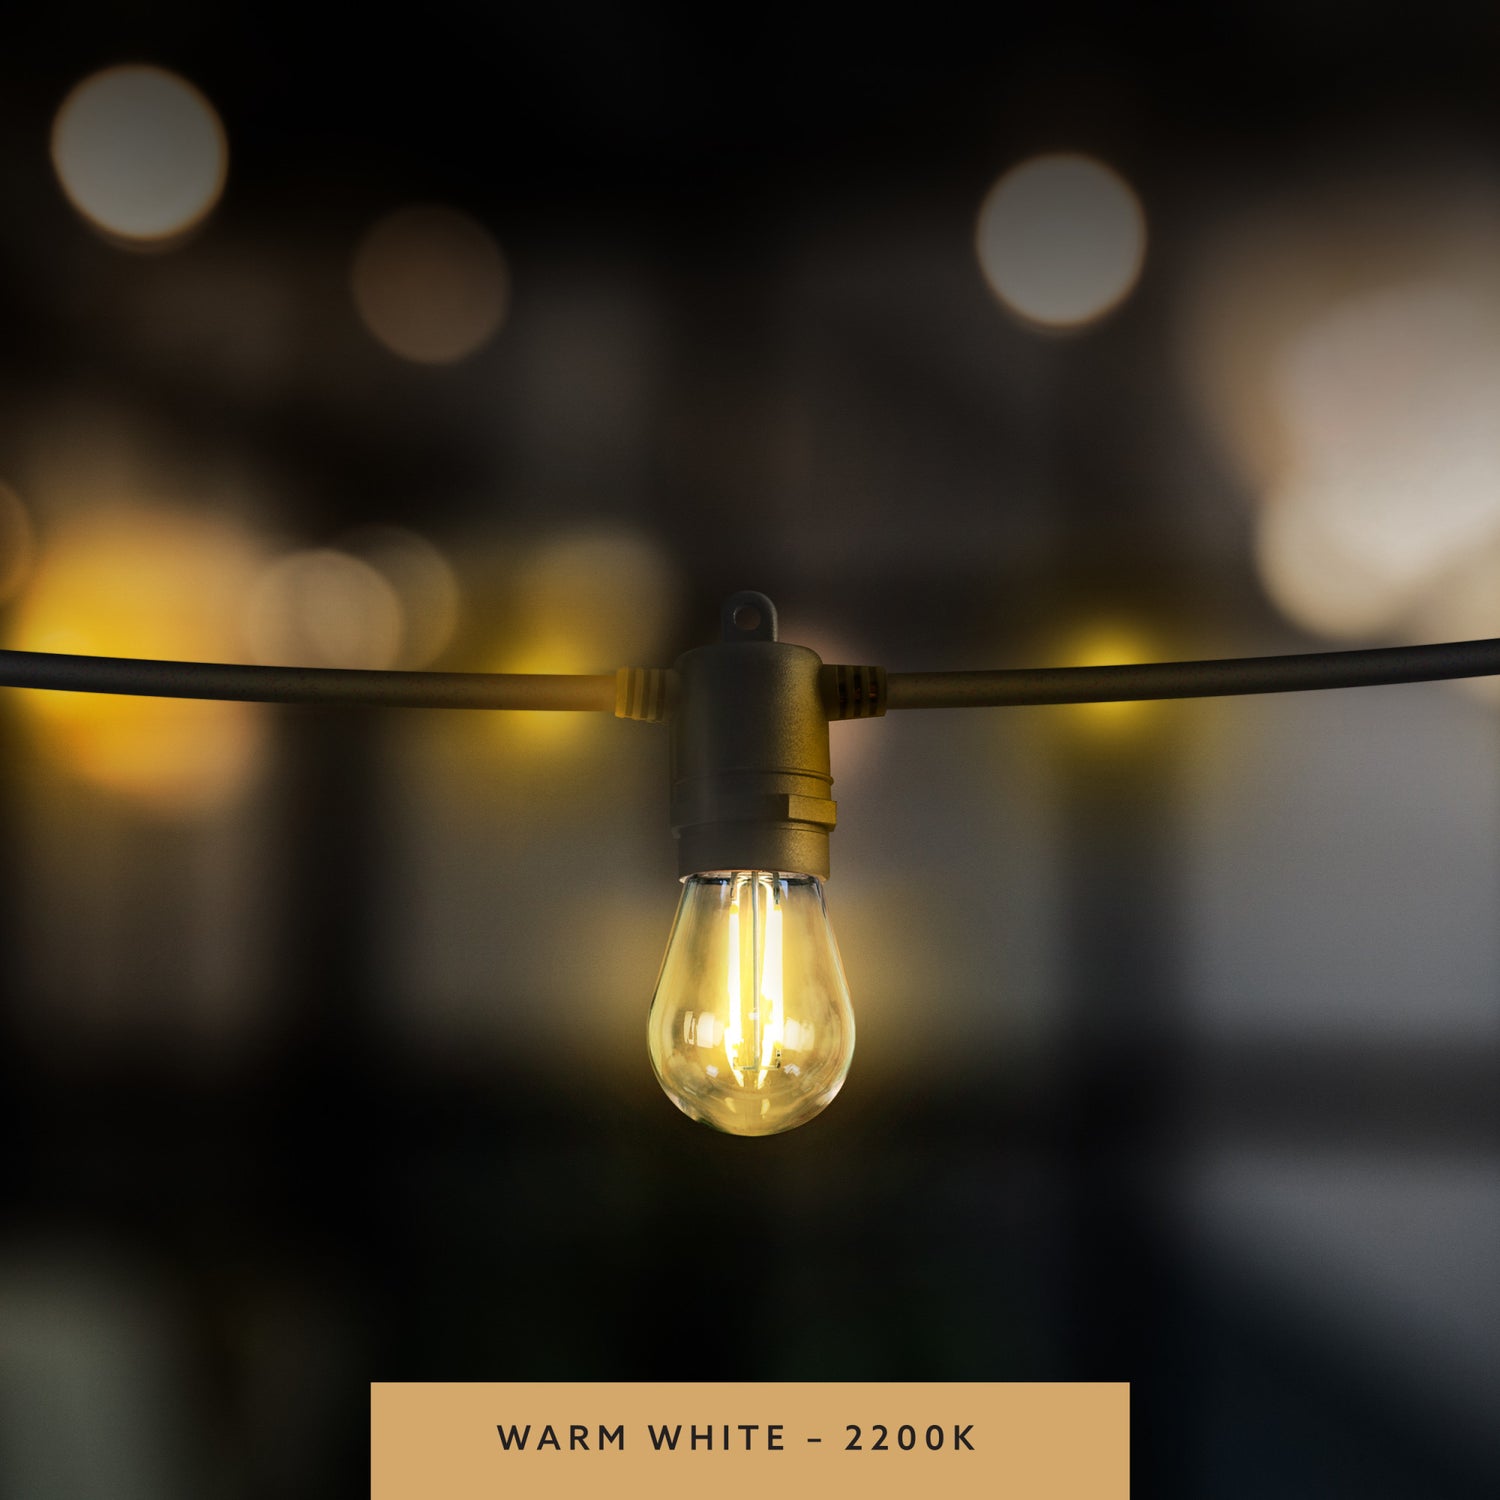 2W (22W Replacement) Warm White (2200K) S14 Base (E26 Replacement) LED High Output String Light Bulb Replacement (12-Pack)